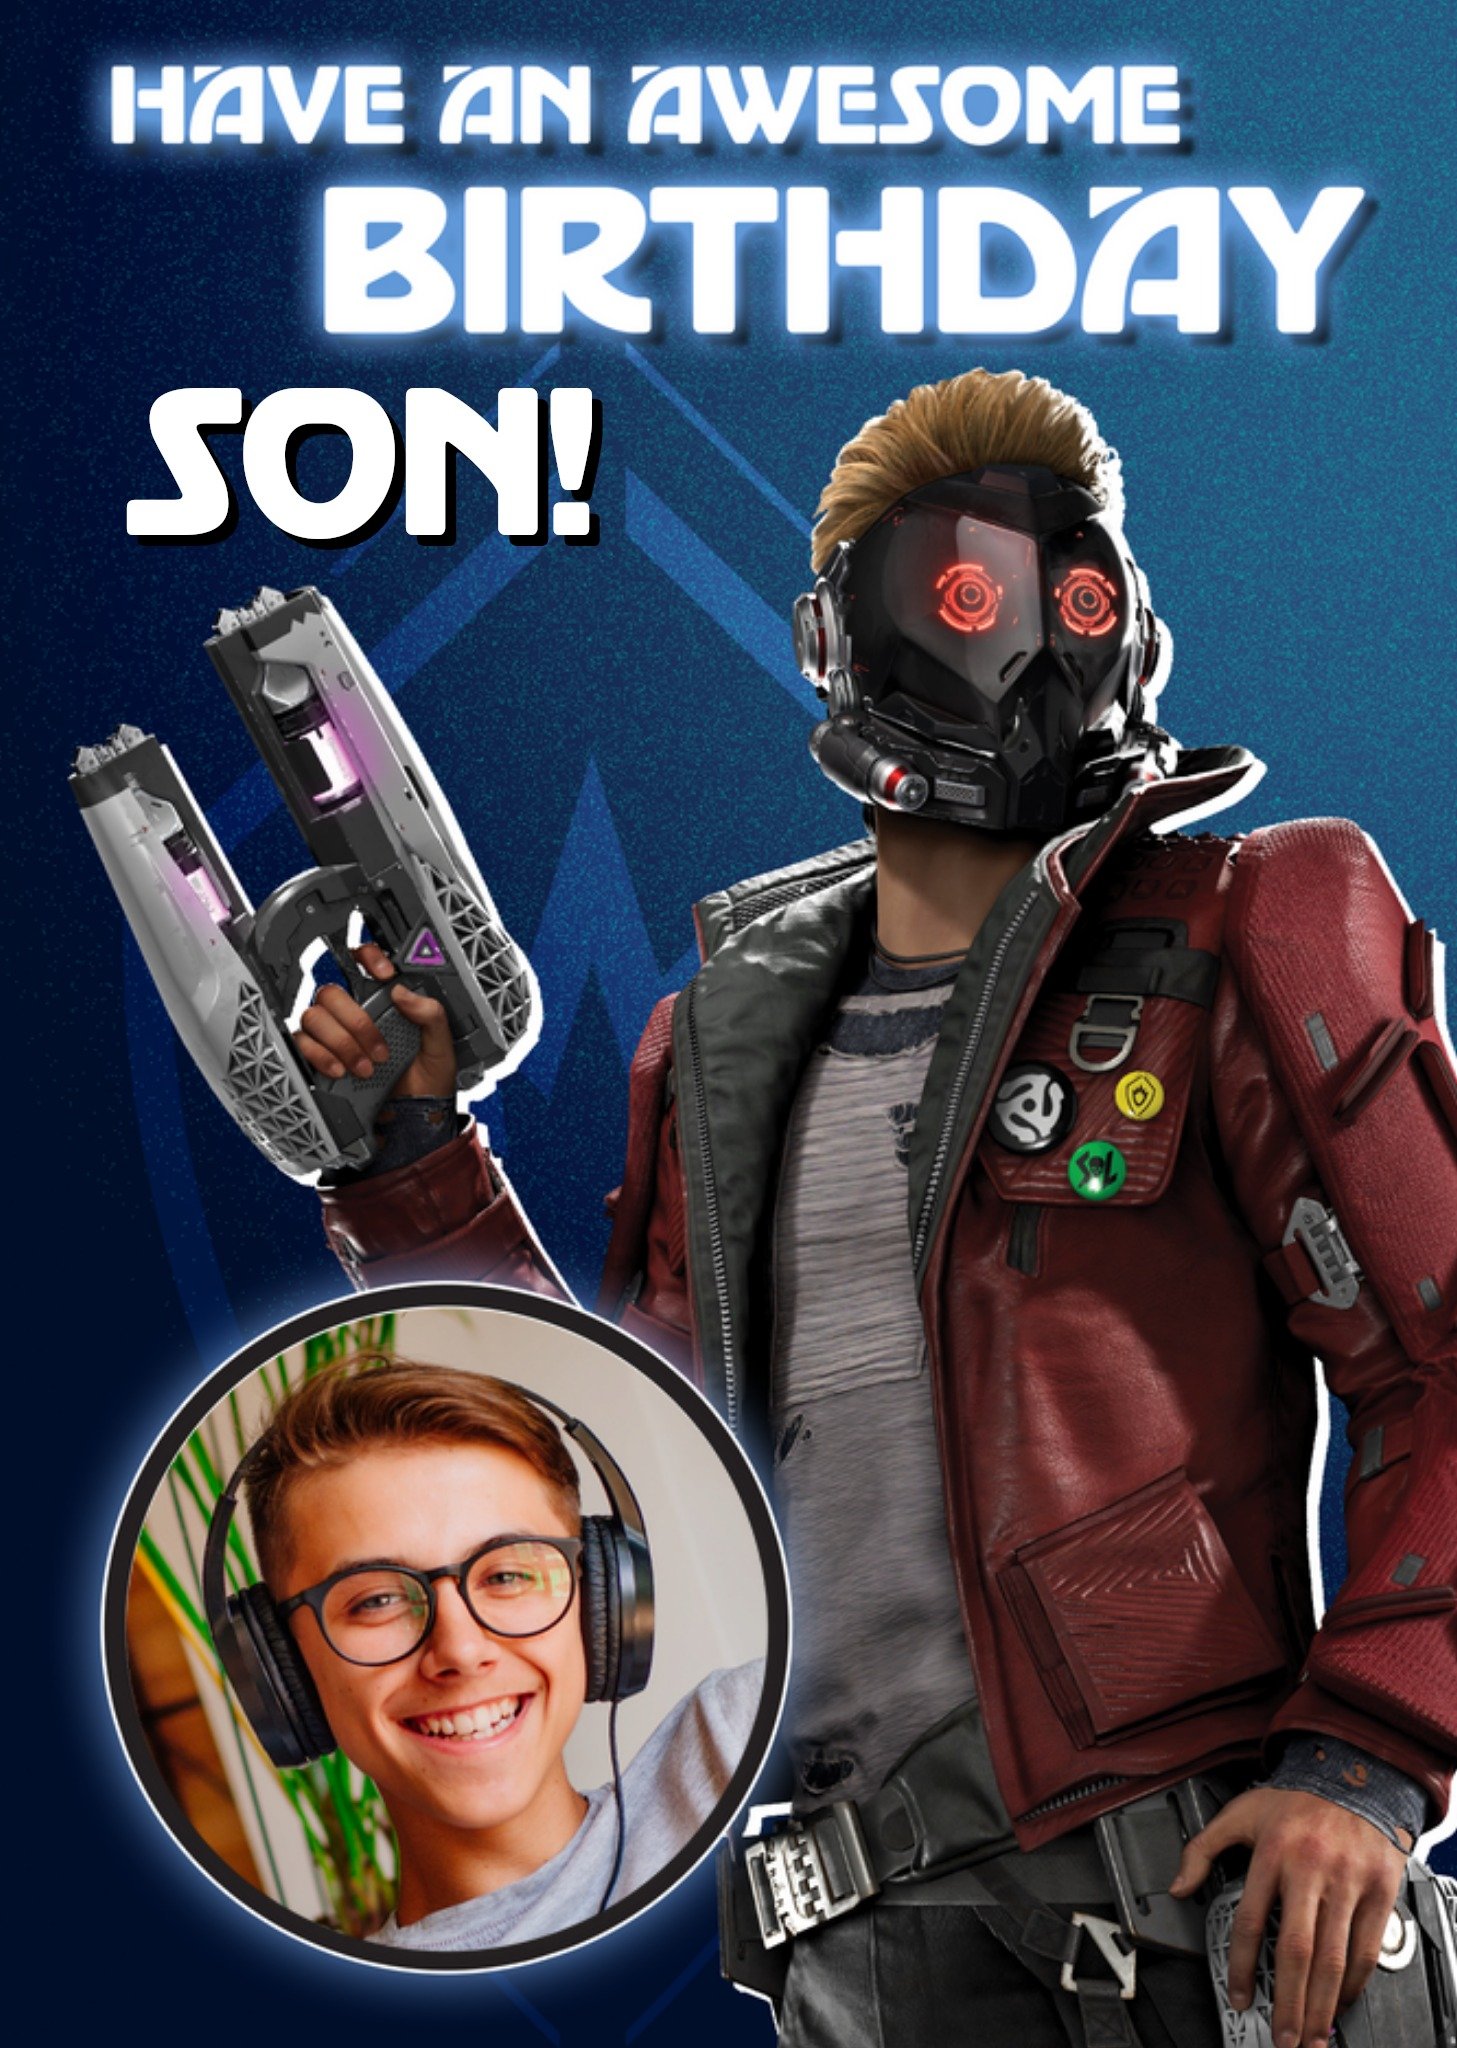 Disney Guardians Of The Galaxy Awesome Birthday Son Photo Upload Birthday Card, Large